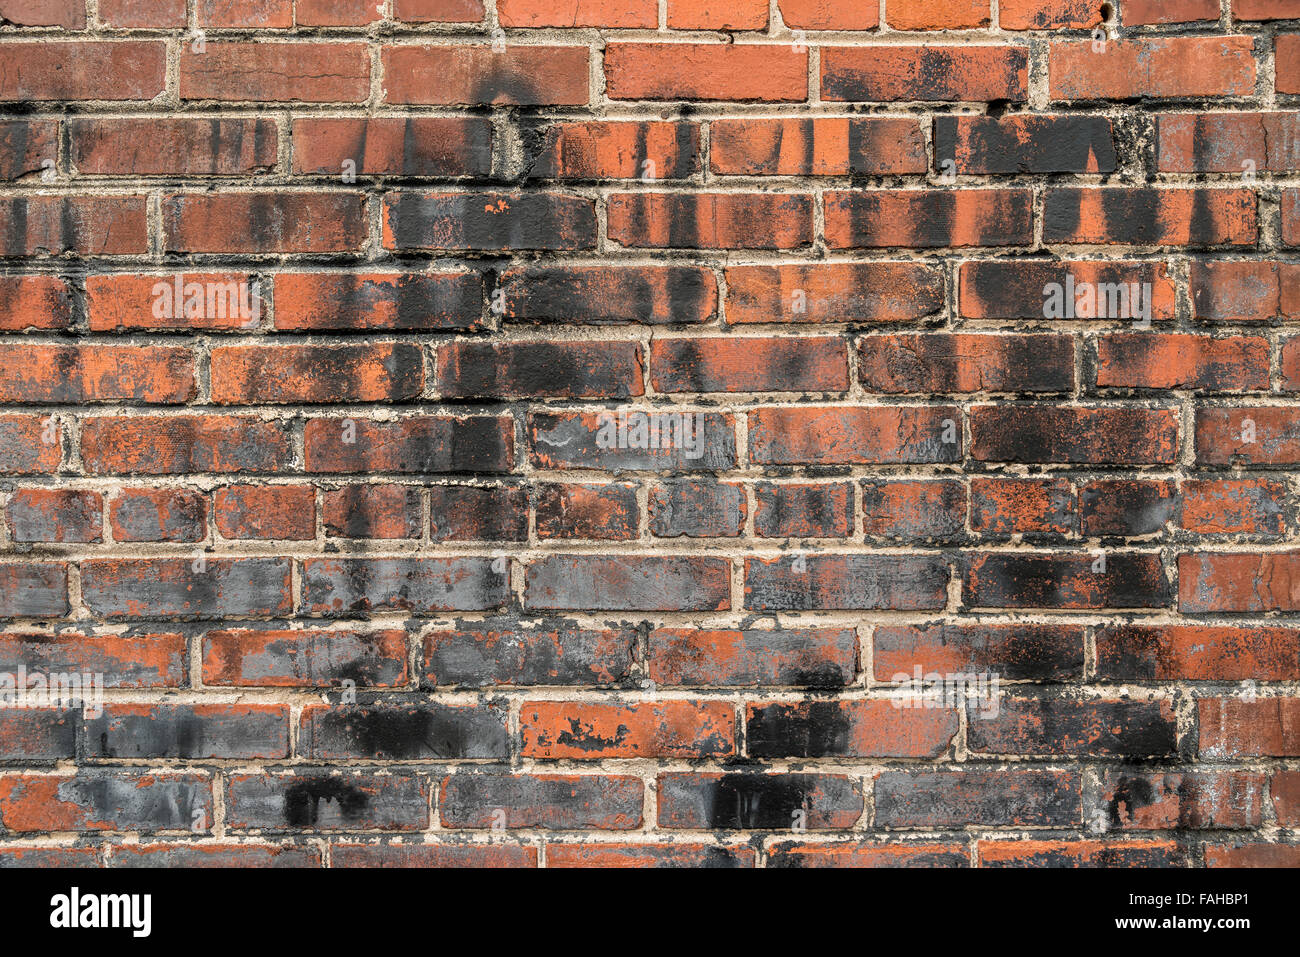 Hundred Year Old Painted Brick Wall Background Stock Photo